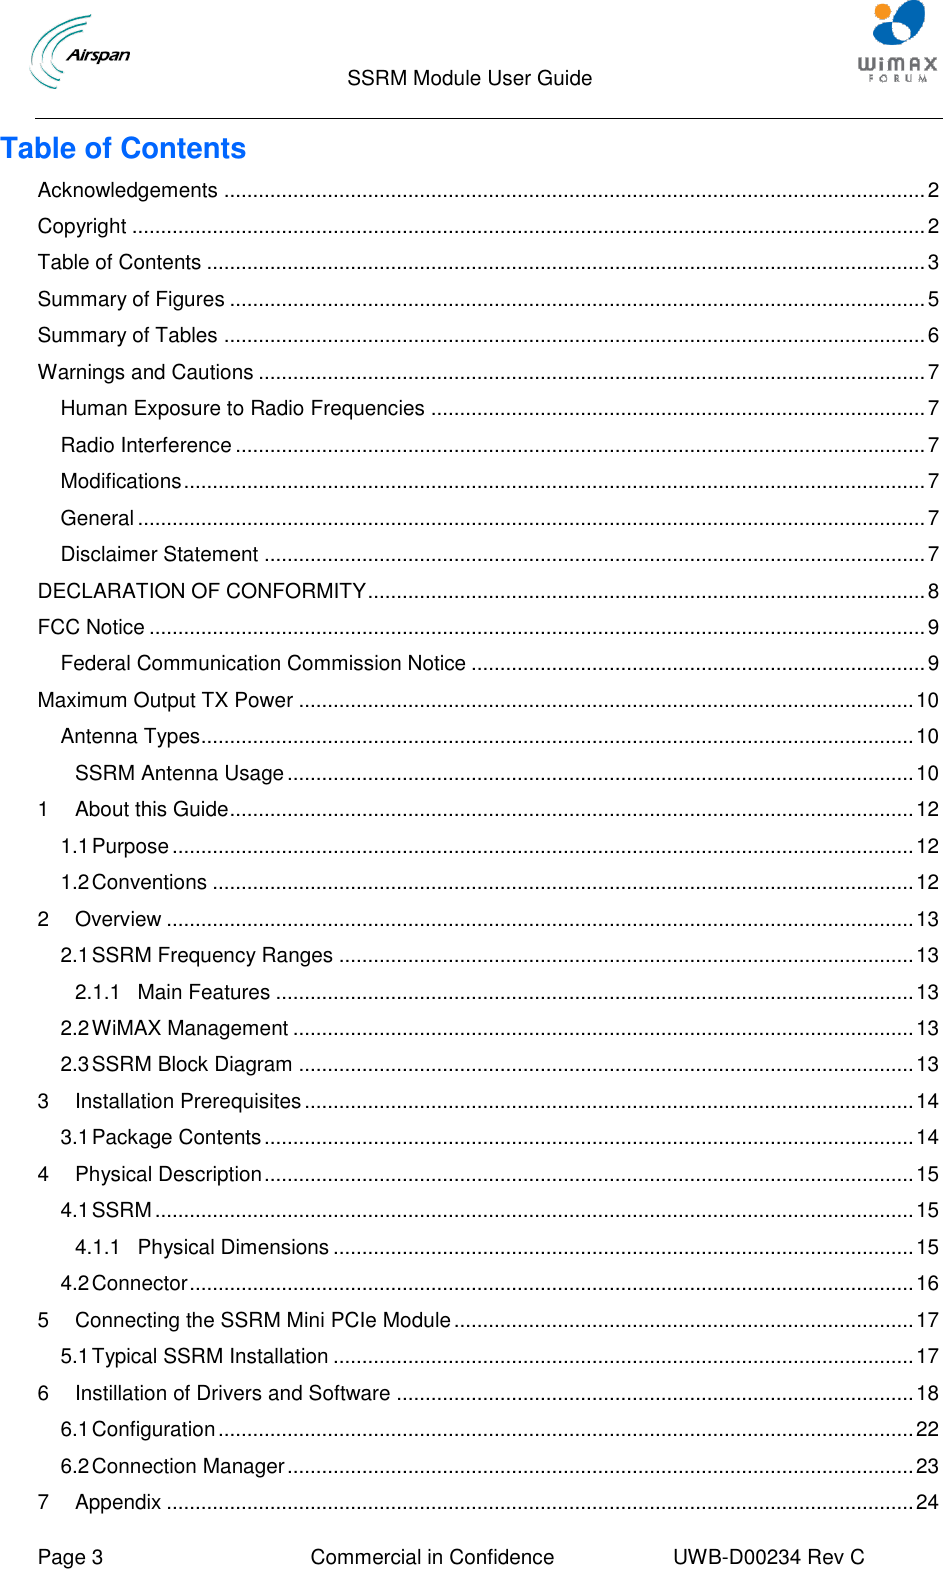                                  SSRM Module User Guide     Page 3  Commercial in Confidence  UWB-D00234 Rev C    Table of Contents Acknowledgements .......................................................................................................................... 2 Copyright .......................................................................................................................................... 2 Table of Contents ............................................................................................................................. 3 Summary of Figures ......................................................................................................................... 5 Summary of Tables .......................................................................................................................... 6 Warnings and Cautions .................................................................................................................... 7 Human Exposure to Radio Frequencies ...................................................................................... 7 Radio Interference ........................................................................................................................ 7 Modifications ................................................................................................................................. 7 General ......................................................................................................................................... 7 Disclaimer Statement ................................................................................................................... 7 DECLARATION OF CONFORMITY ................................................................................................. 8 FCC Notice ....................................................................................................................................... 9 Federal Communication Commission Notice ............................................................................... 9 Maximum Output TX Power ........................................................................................................... 10 Antenna Types............................................................................................................................ 10 SSRM Antenna Usage ............................................................................................................. 10 1 About this Guide ....................................................................................................................... 12 1.1 Purpose ................................................................................................................................. 12 1.2 Conventions .......................................................................................................................... 12 2 Overview .................................................................................................................................. 13 2.1 SSRM Frequency Ranges .................................................................................................... 13 2.1.1 Main Features ............................................................................................................... 13 2.2 WiMAX Management ............................................................................................................ 13 2.3 SSRM Block Diagram ........................................................................................................... 13 3 Installation Prerequisites .......................................................................................................... 14 3.1 Package Contents ................................................................................................................. 14 4 Physical Description ................................................................................................................. 15 4.1 SSRM .................................................................................................................................... 15 4.1.1 Physical Dimensions ..................................................................................................... 15 4.2 Connector .............................................................................................................................. 16 5 Connecting the SSRM Mini PCIe Module ................................................................................ 17 5.1 Typical SSRM Installation ..................................................................................................... 17 6 Instillation of Drivers and Software .......................................................................................... 18 6.1 Configuration ......................................................................................................................... 22 6.2 Connection Manager ............................................................................................................. 23 7 Appendix .................................................................................................................................. 24 